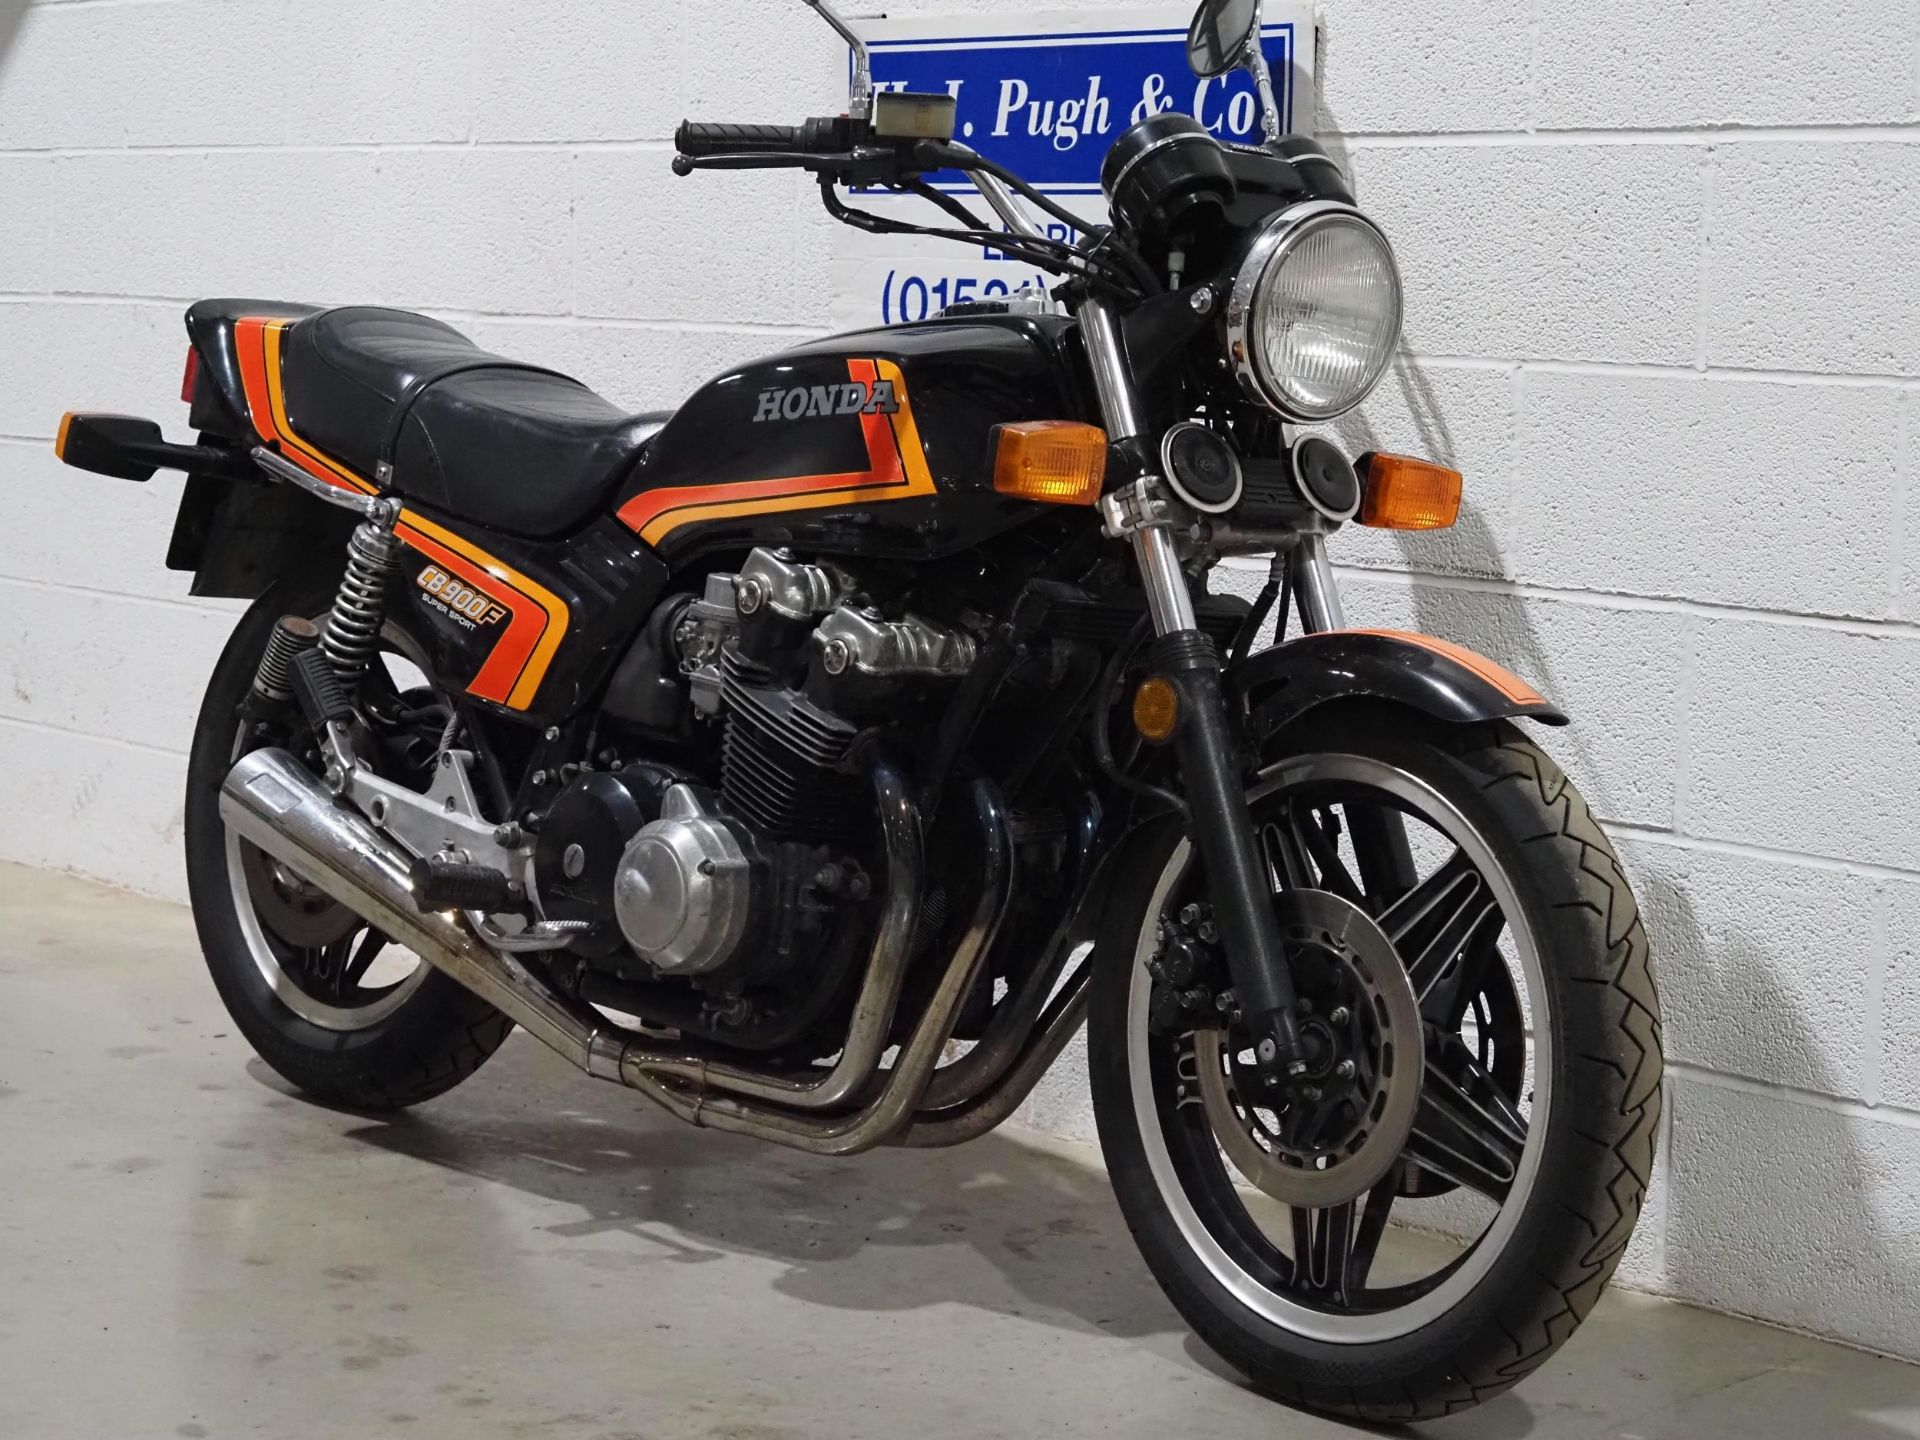 Honda CB900F SuperSport motorcycle. 1982. 901cc. Runs and rides. Recent new tyres. Comes with MOT - Image 2 of 6